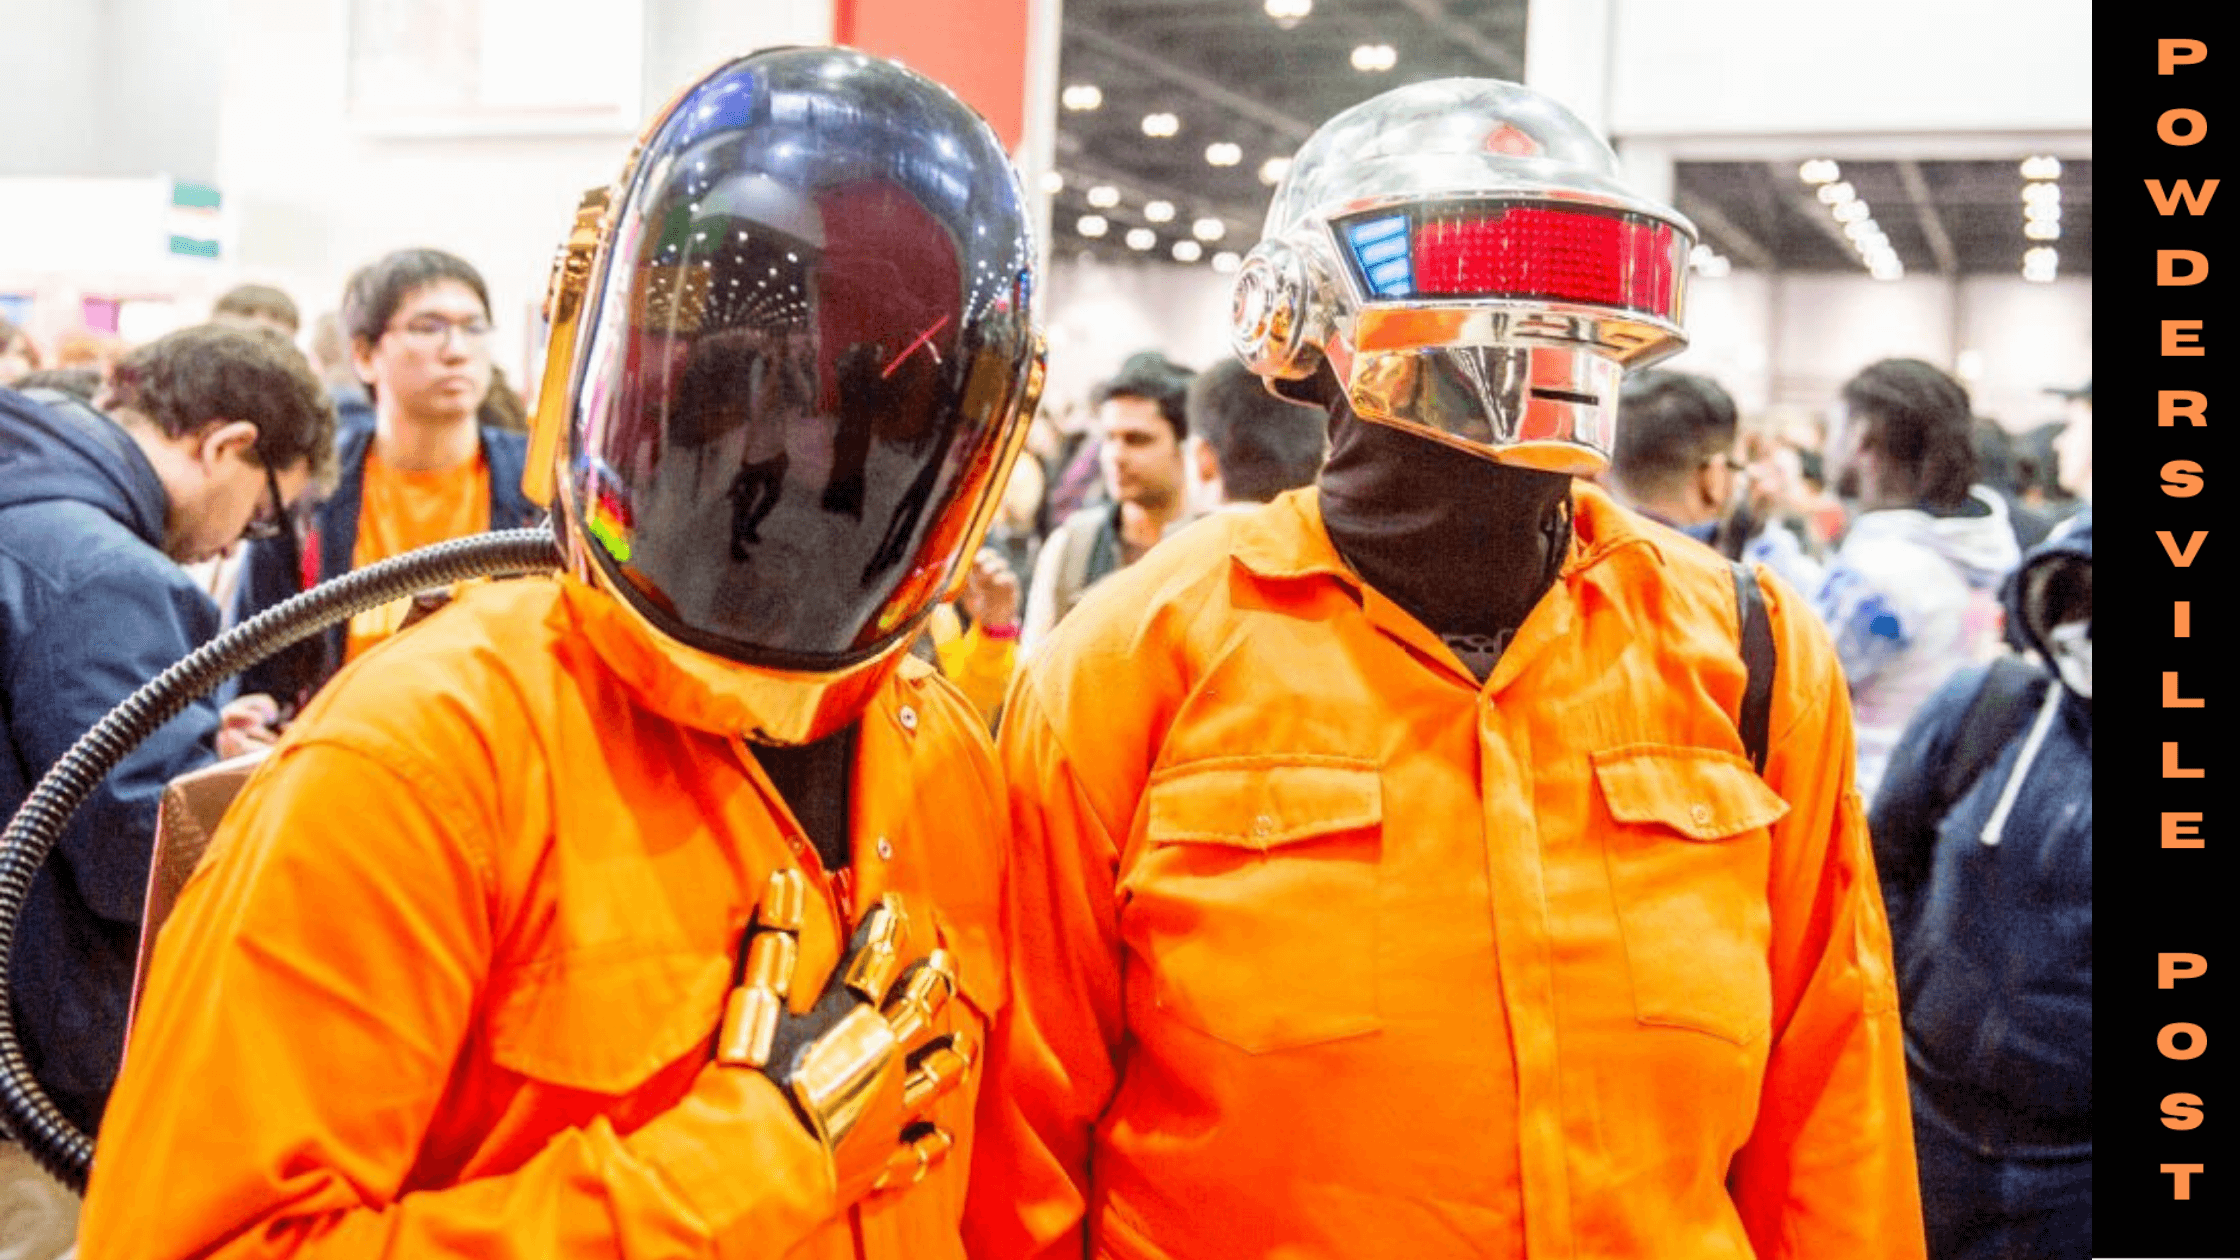 Duo Musicians Daft Punk Takes Off Helmets, Why The Band Comes To An End After 28 Years